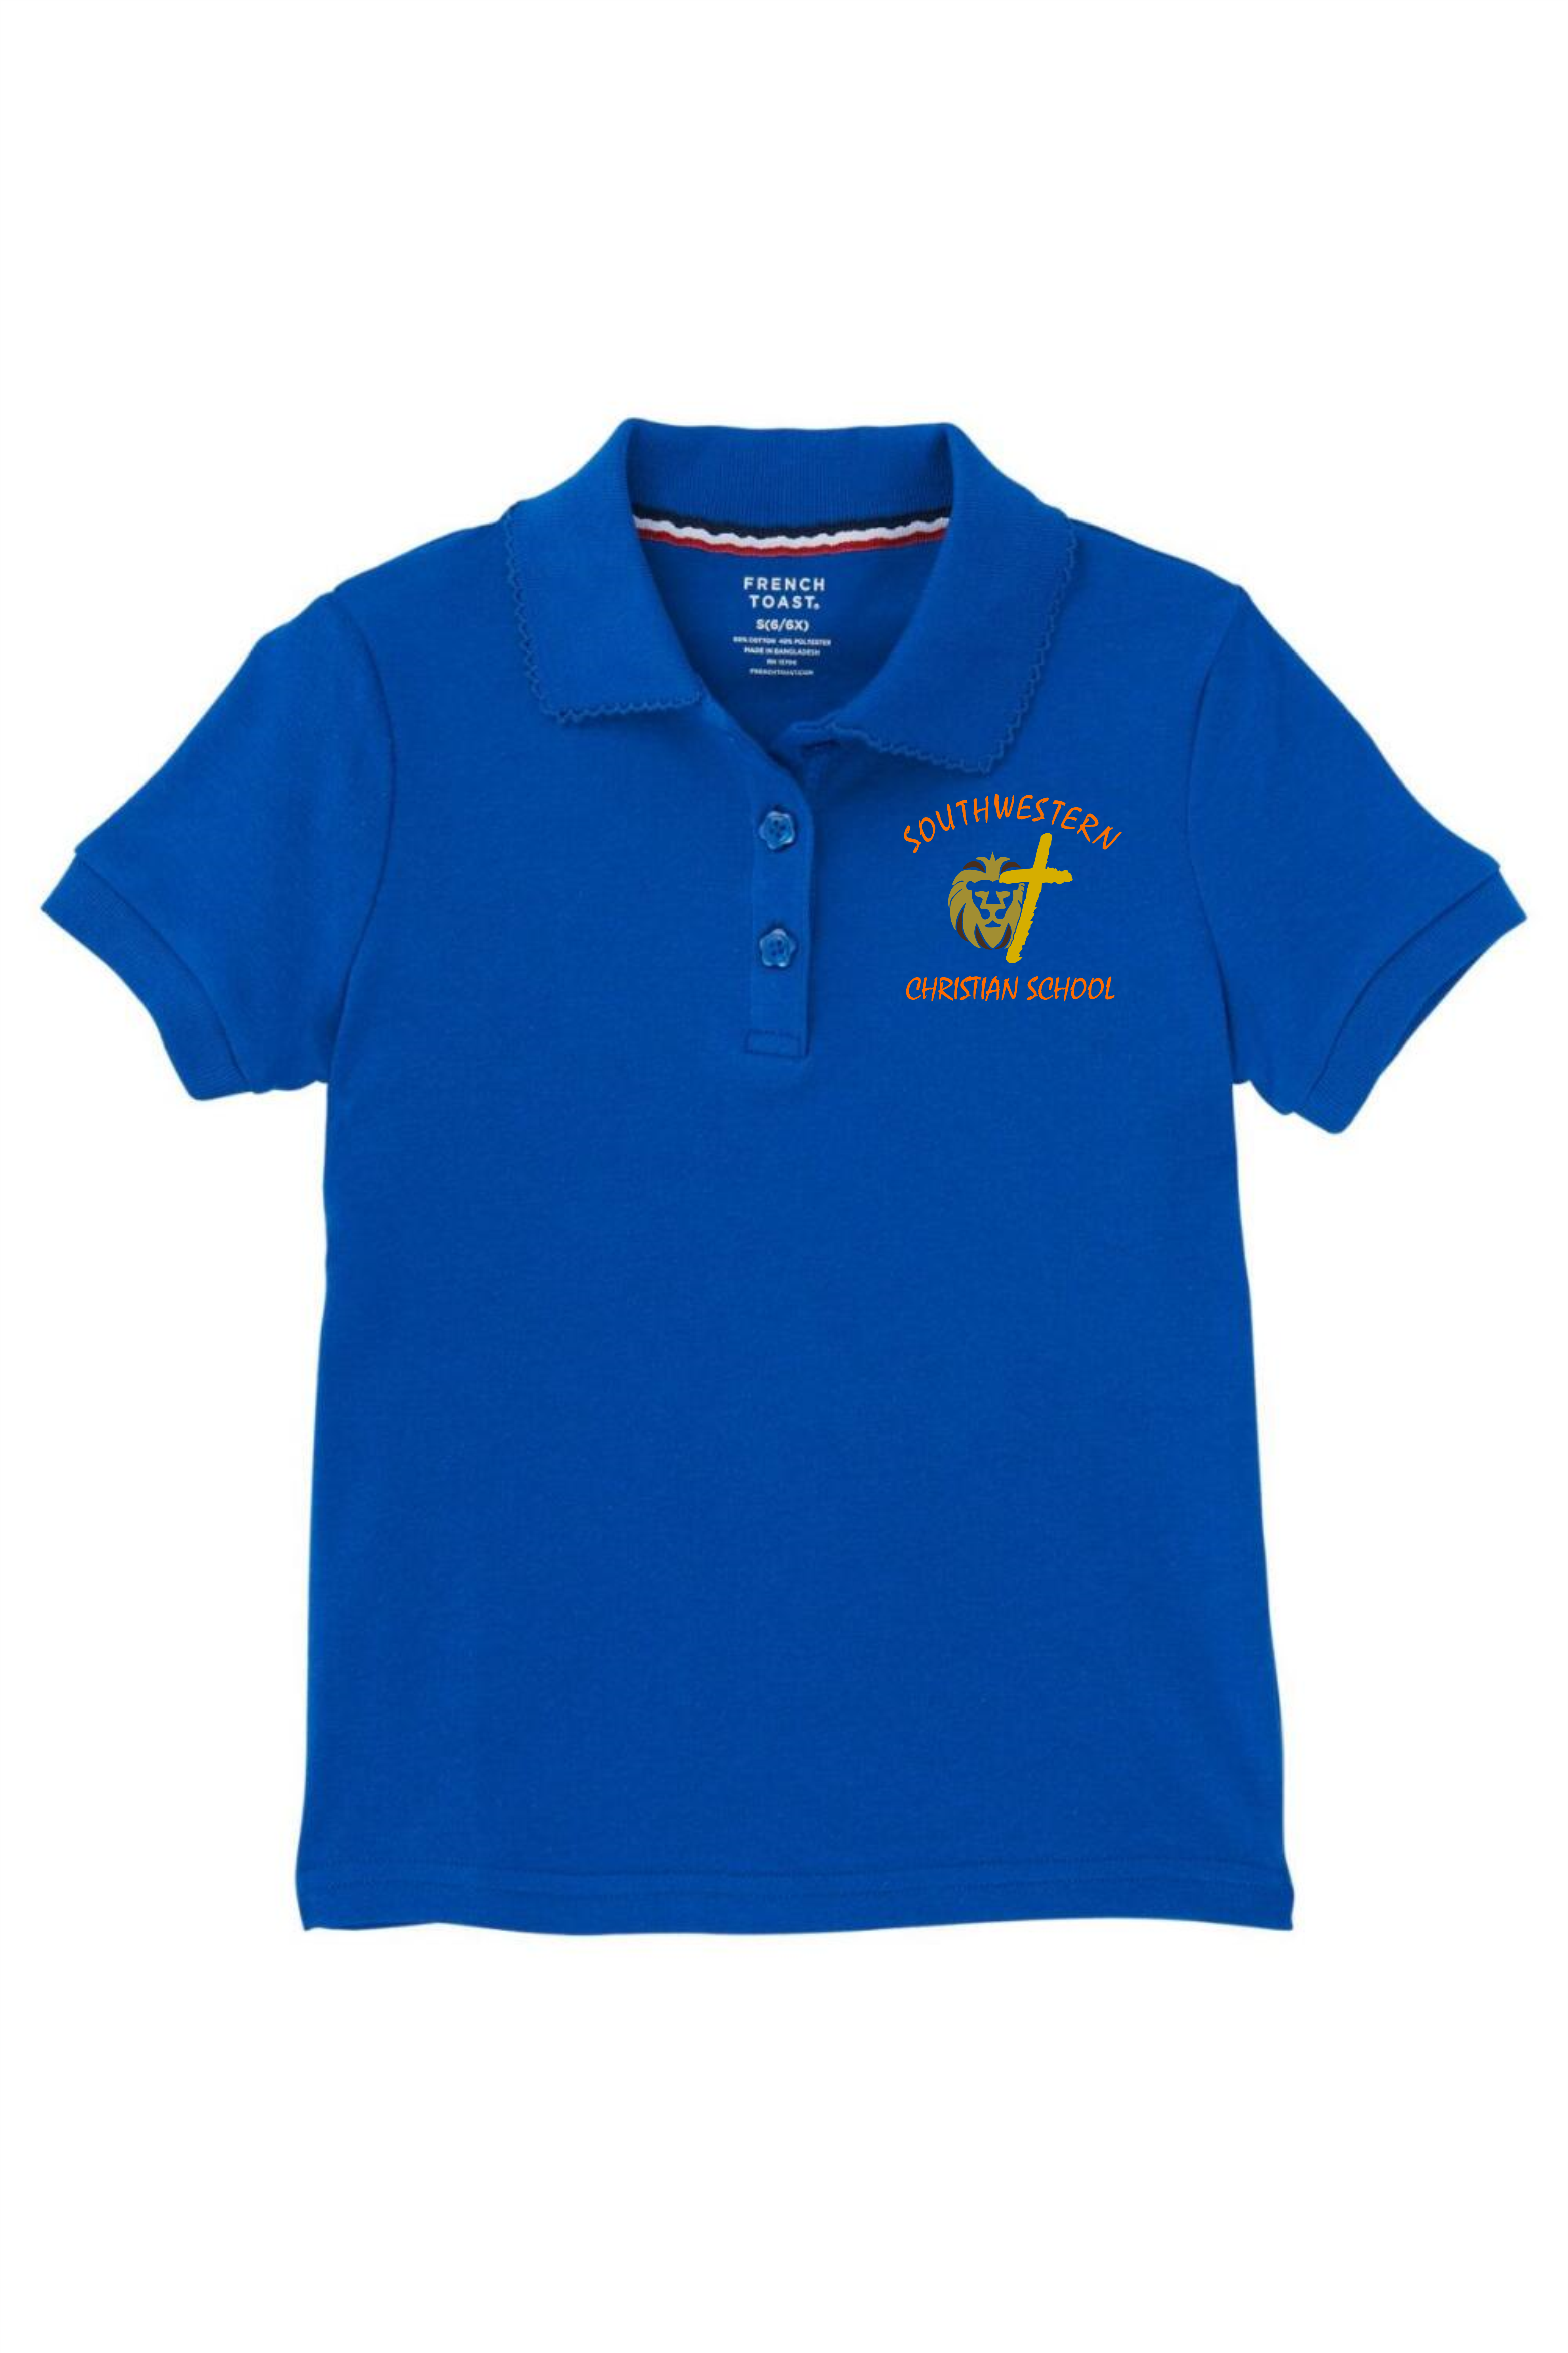 French Toast Girl's Cotton Short Sleeve Polo - SWCS (Polo Size: XS - 4/5, French Toast Polo Color: Royal Blue - SWCS)